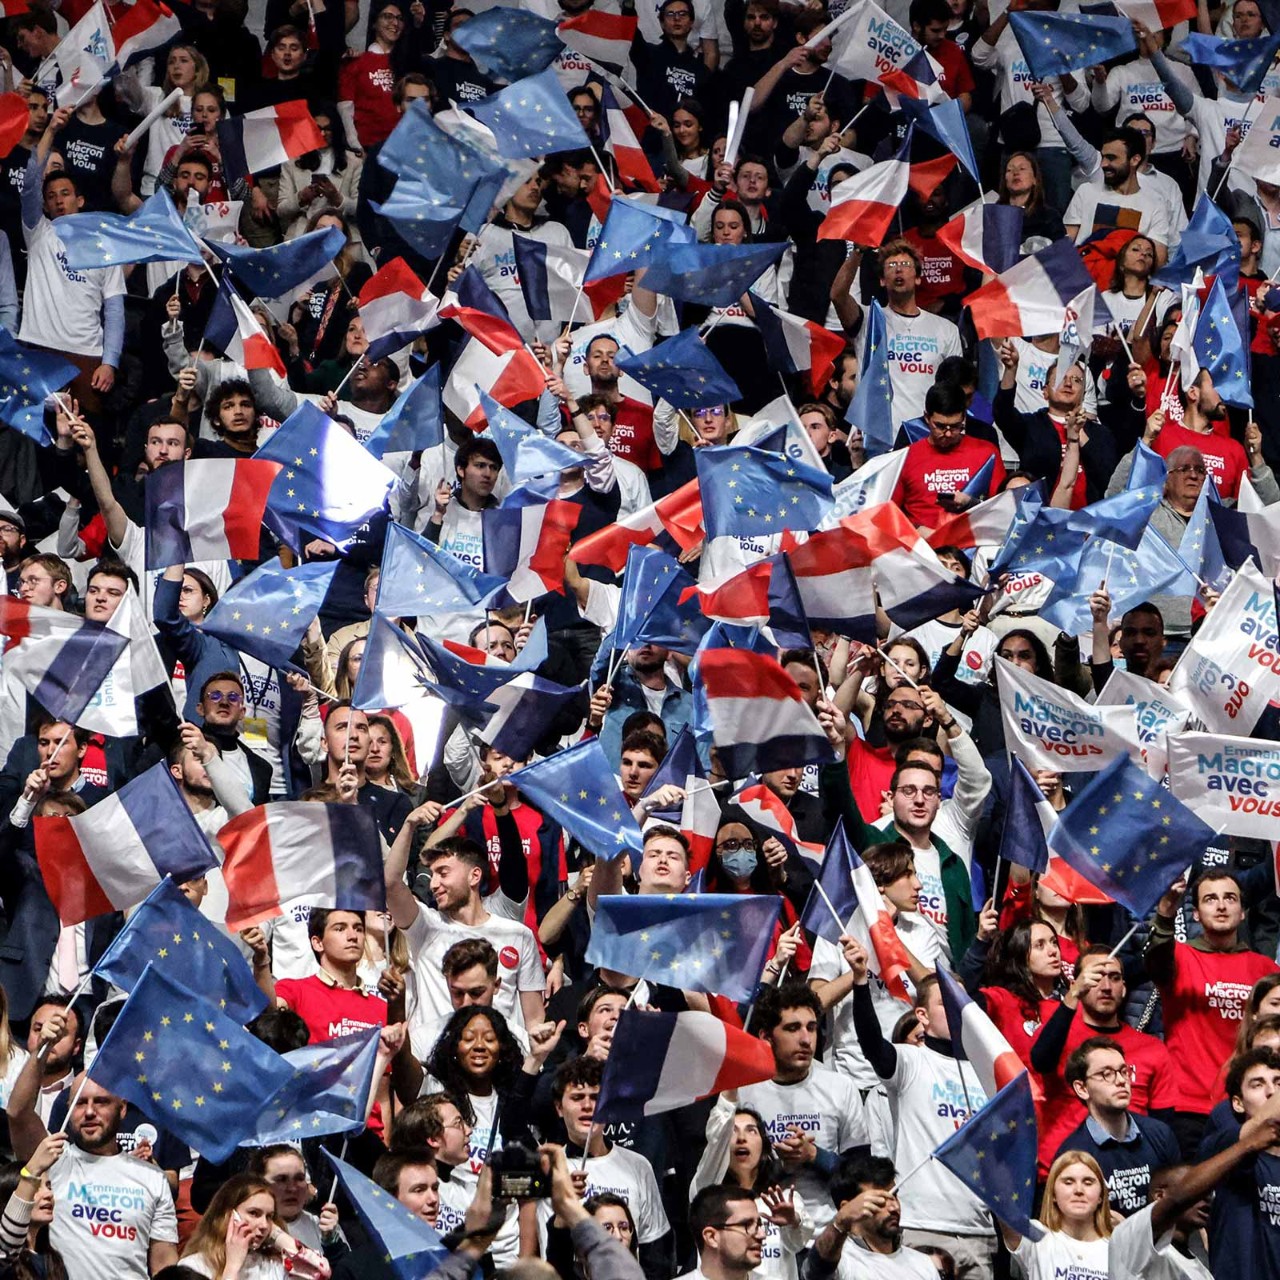 Emmanuel Macron's supporters, ahead of April's presidential election